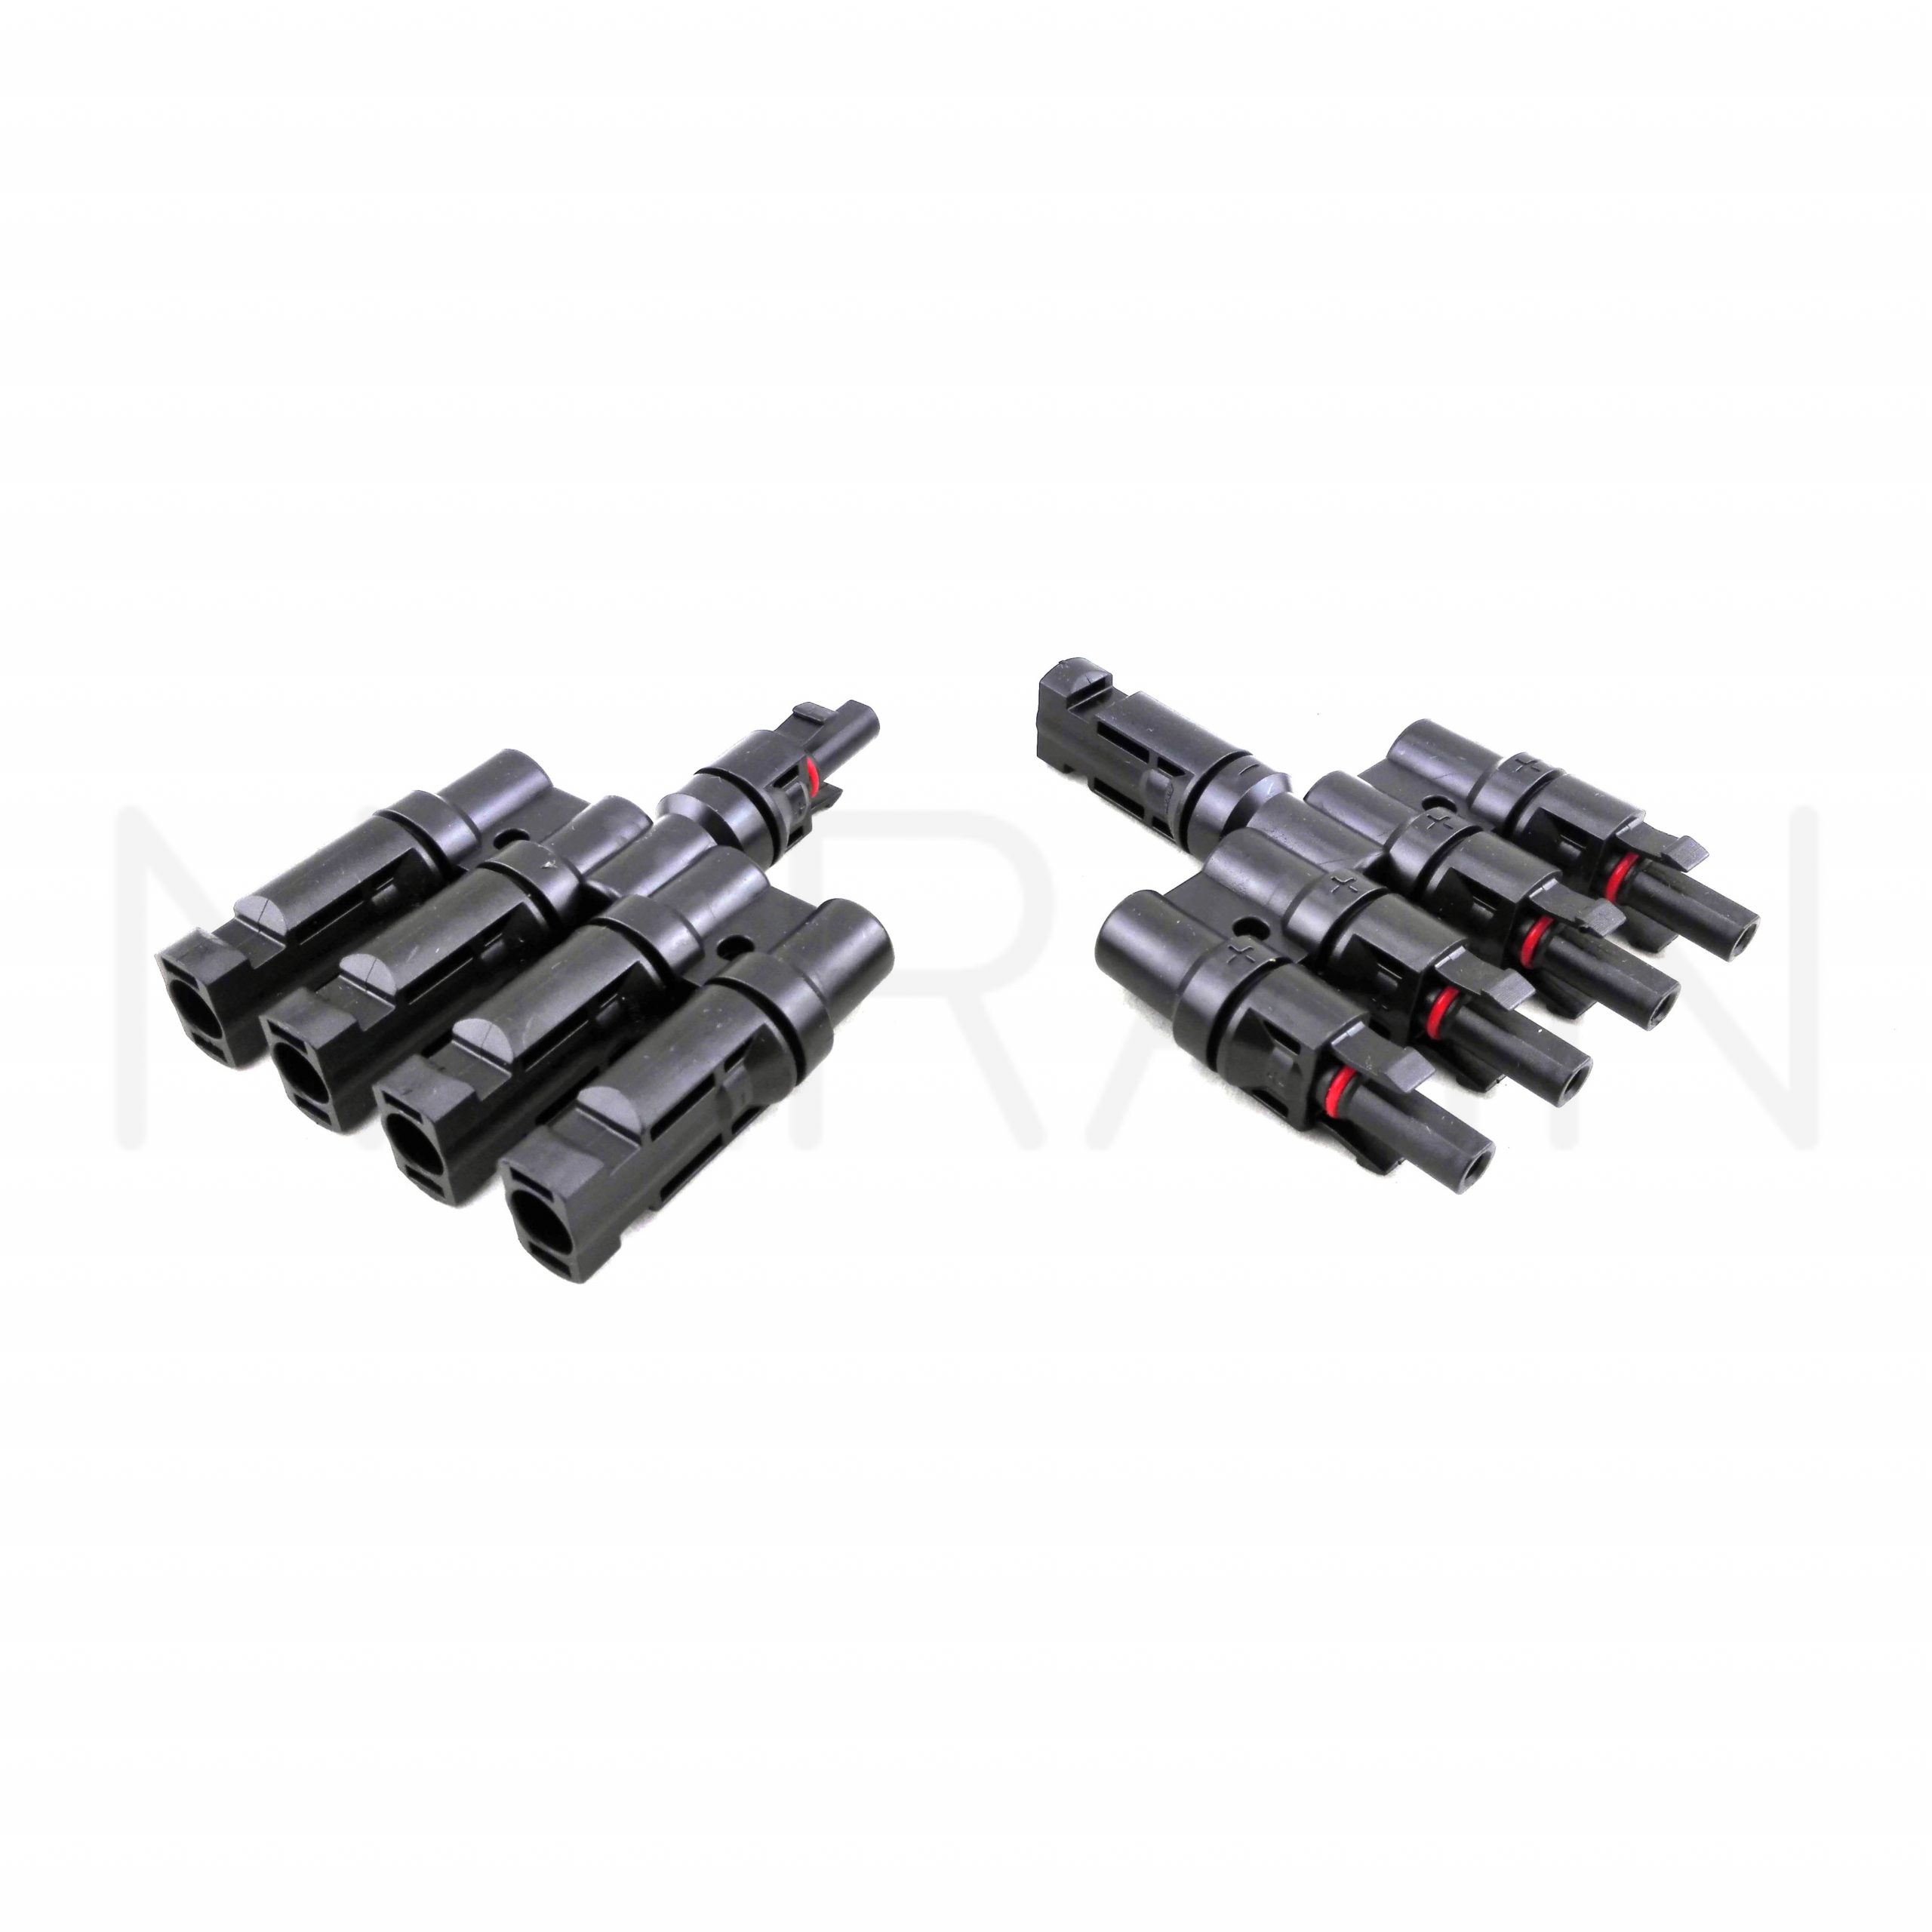 KRXNY Solar Panel MC4 1 to 4 T Branch Connectors PV Cable Coupler Combiner Connector Splitter Adapter M/FFFF and F/MMMM 1 Pair